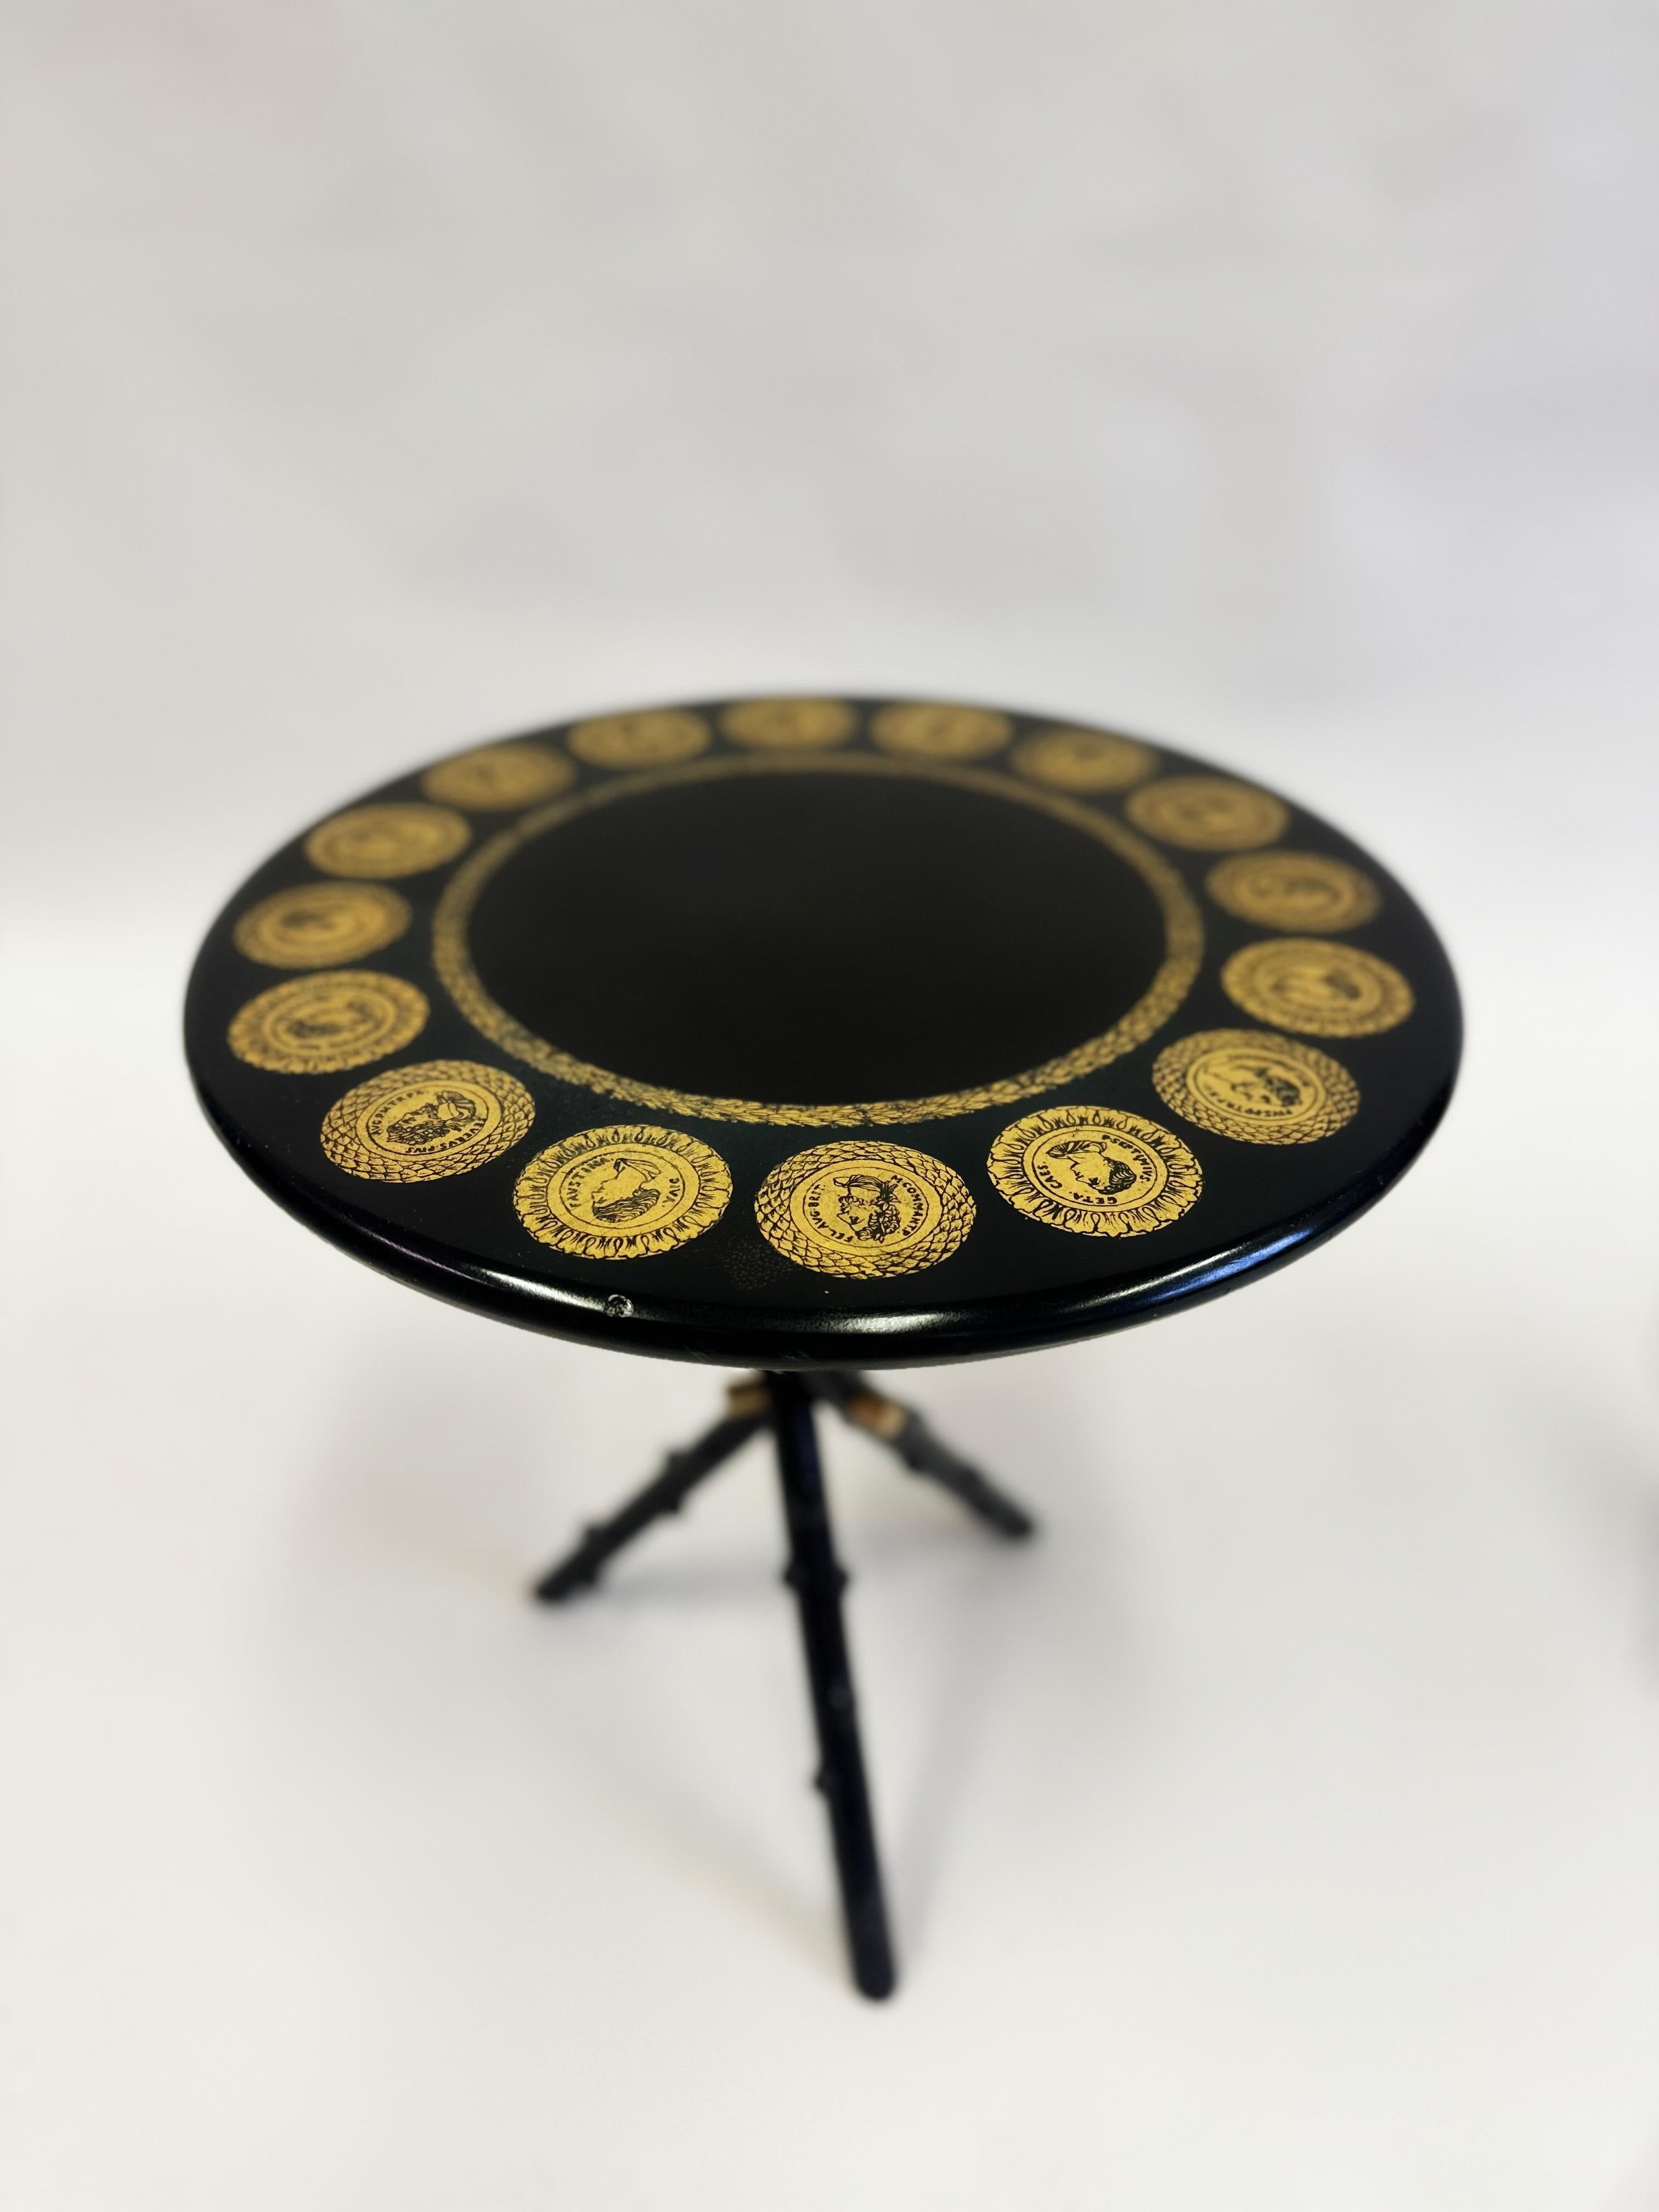 Pair Italian Midcentury Lacquer & Screenprint Side Tables by Piero Fornasetti For Sale 1